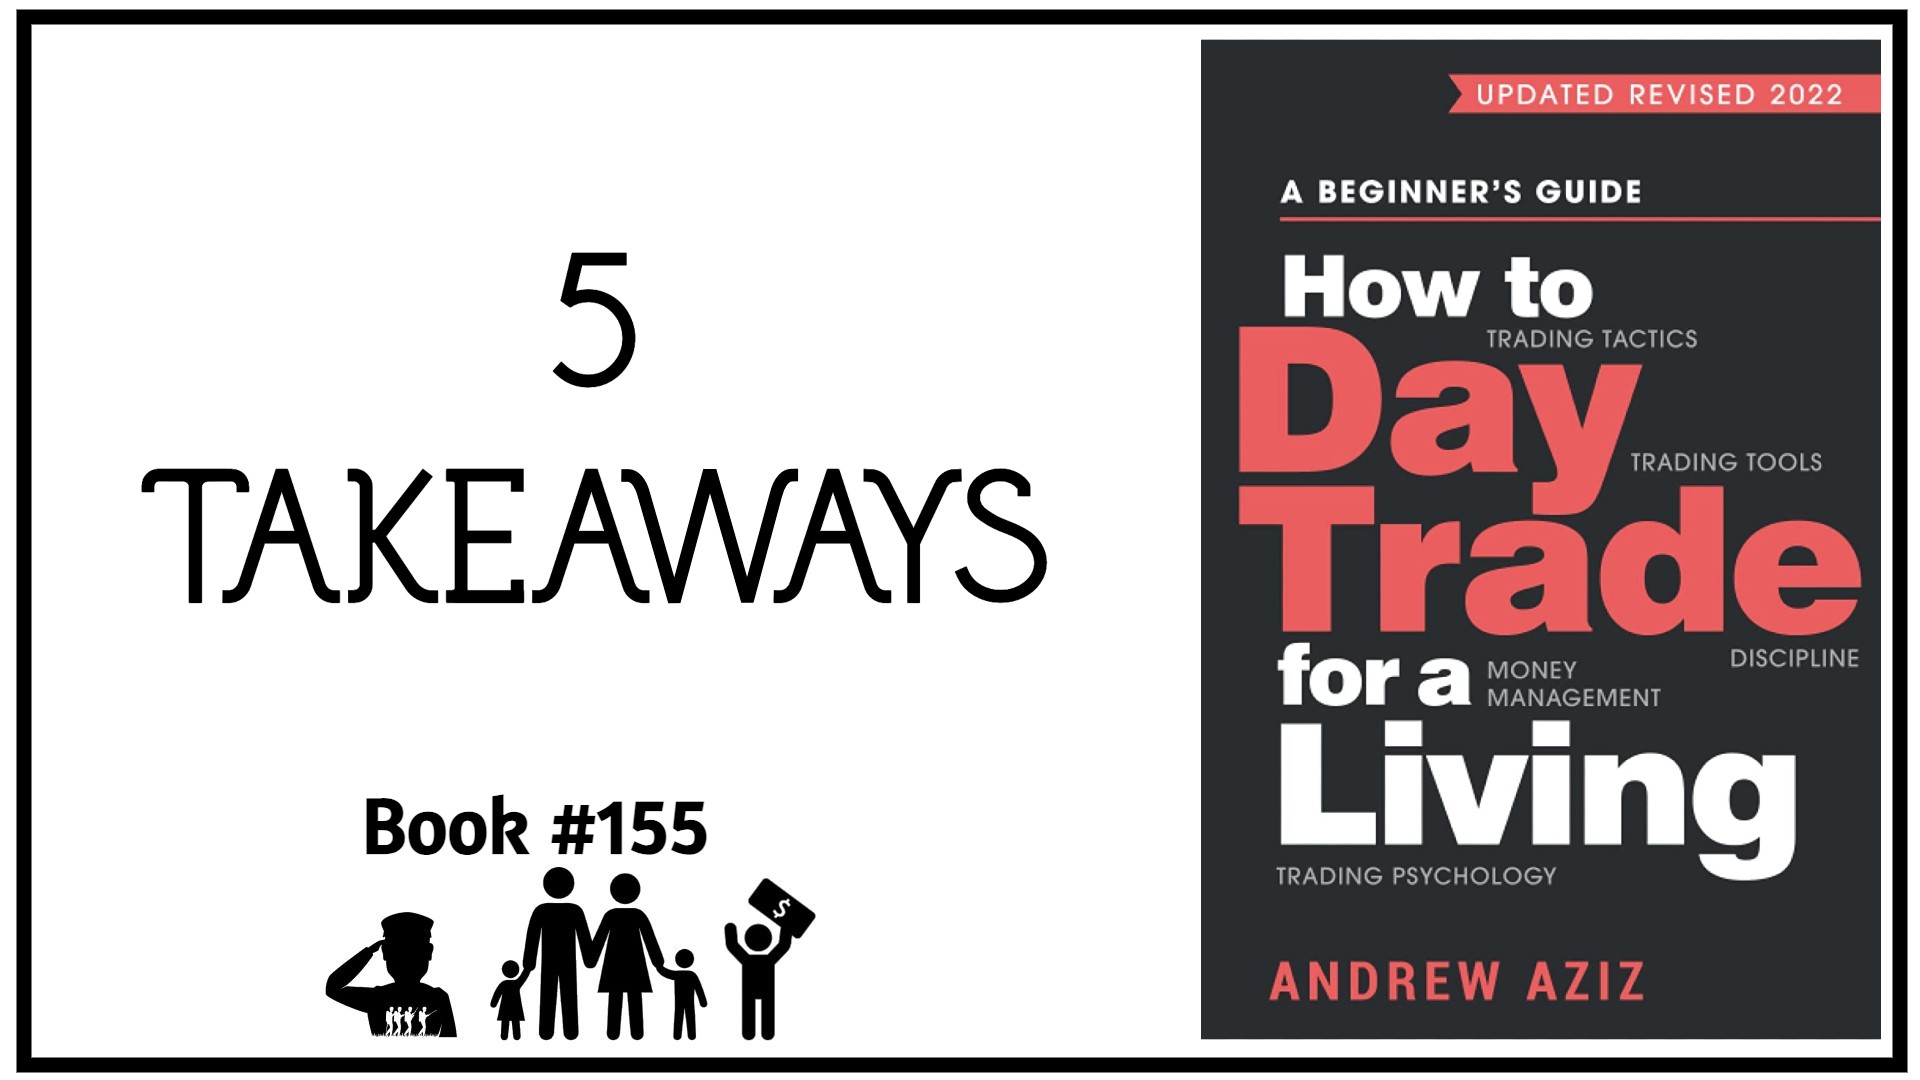 5 Takeaways from “How to Day Trade for a Living”